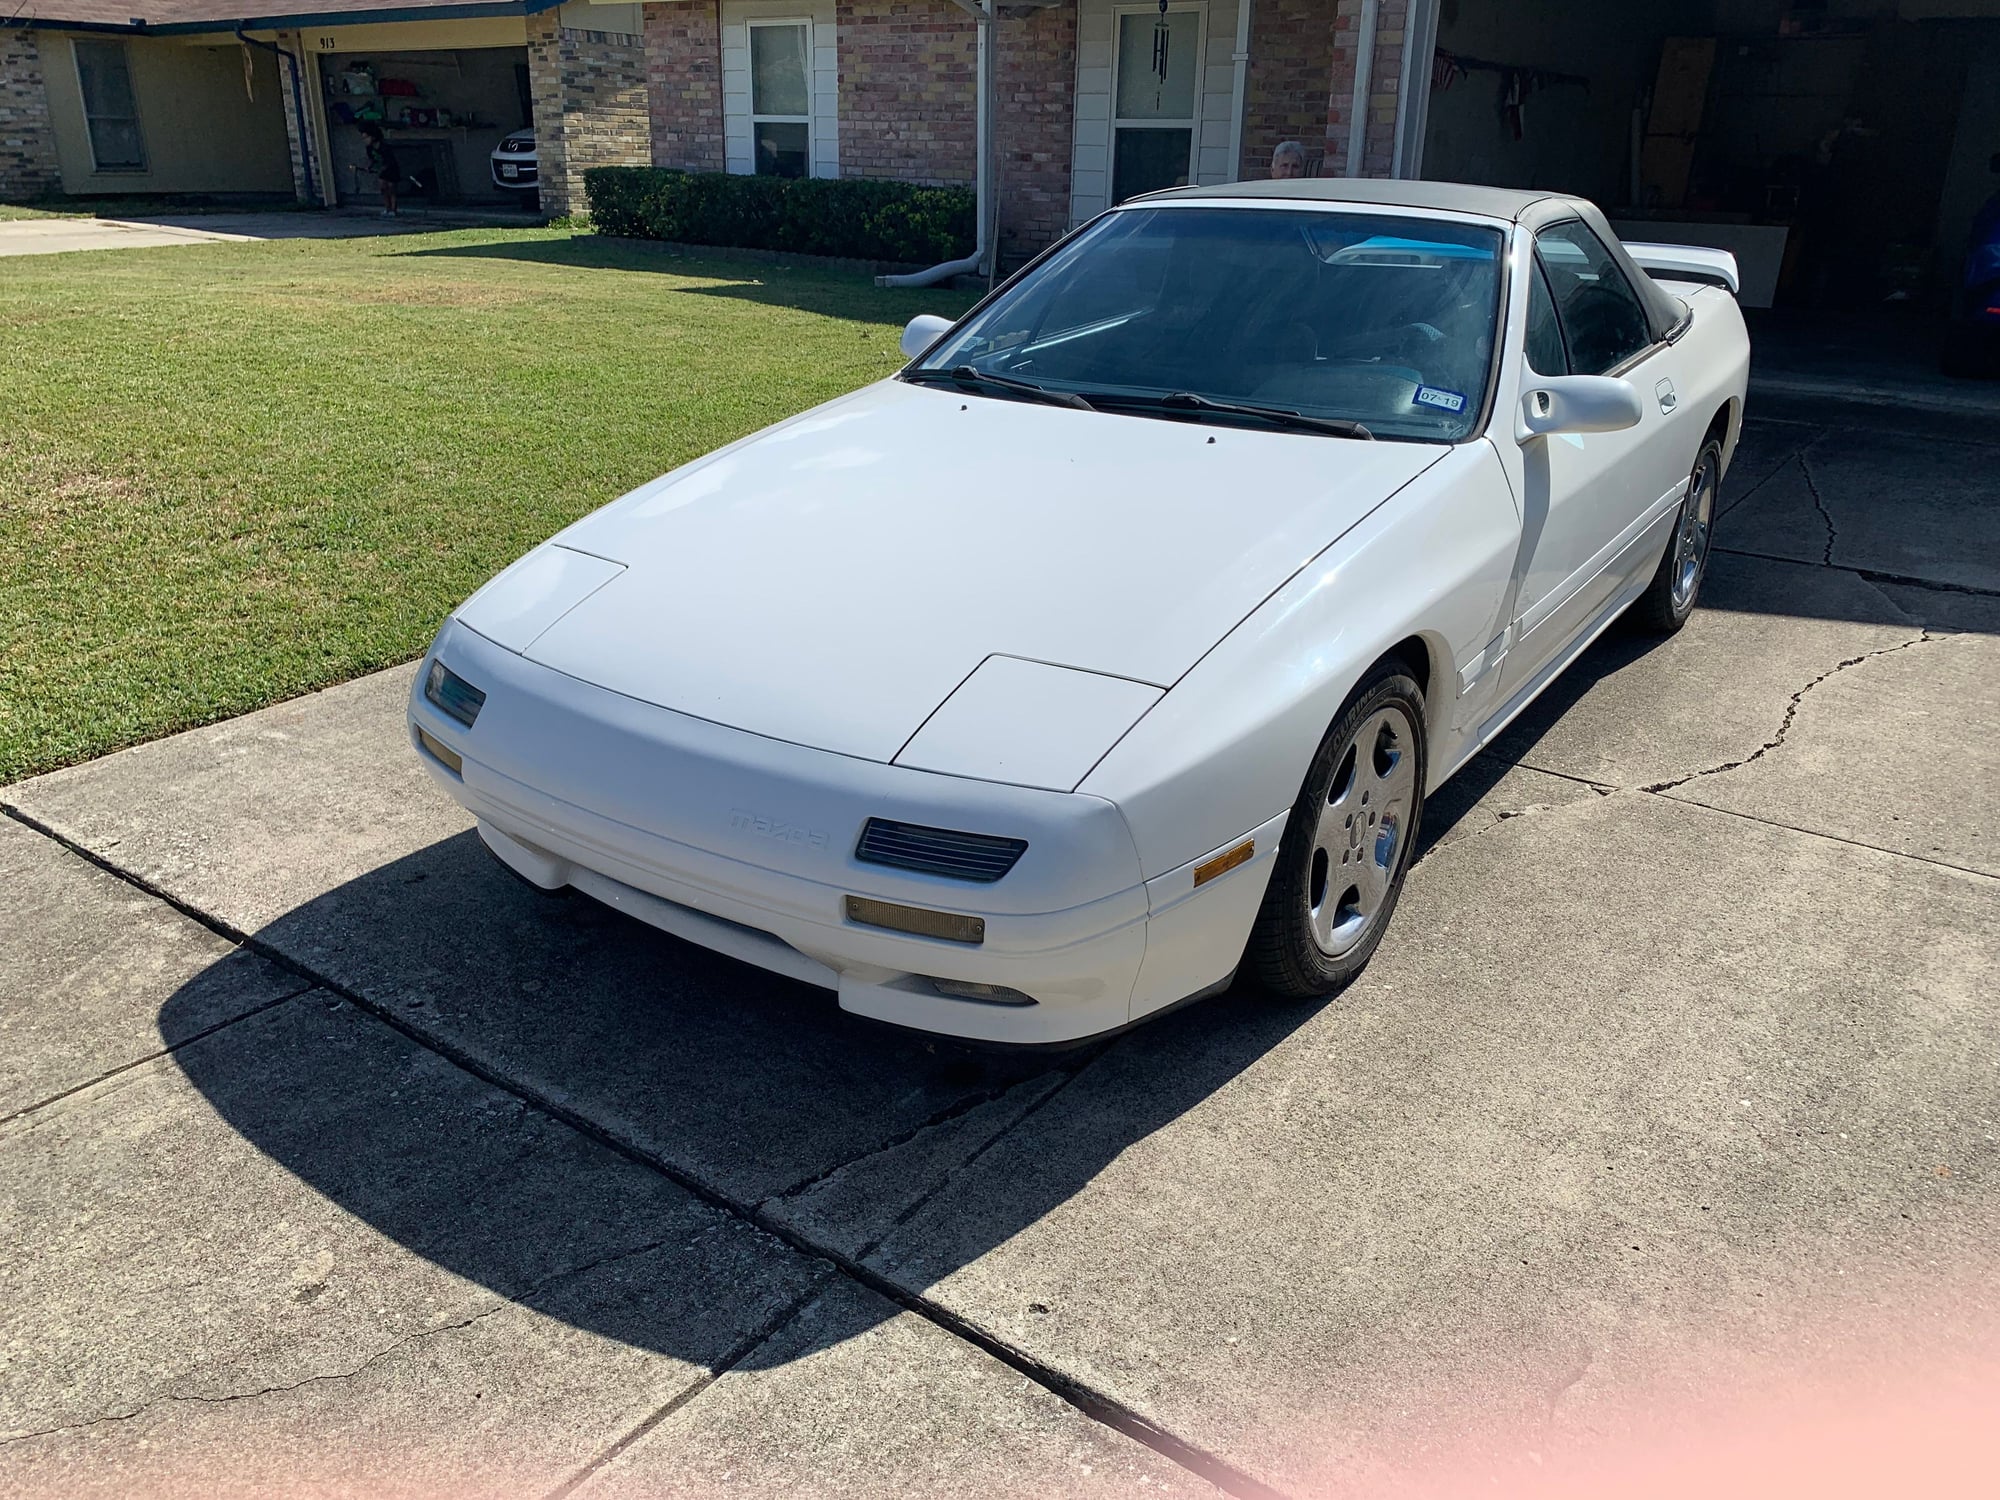 1991 Mazda RX-7 - 1991 convertible 48 k miles - Used - VIN Jm1fc3522m0907447 - 48,000 Miles - Other - 2WD - Automatic - Convertible - White - Grand Prairie, TX 75051, United States